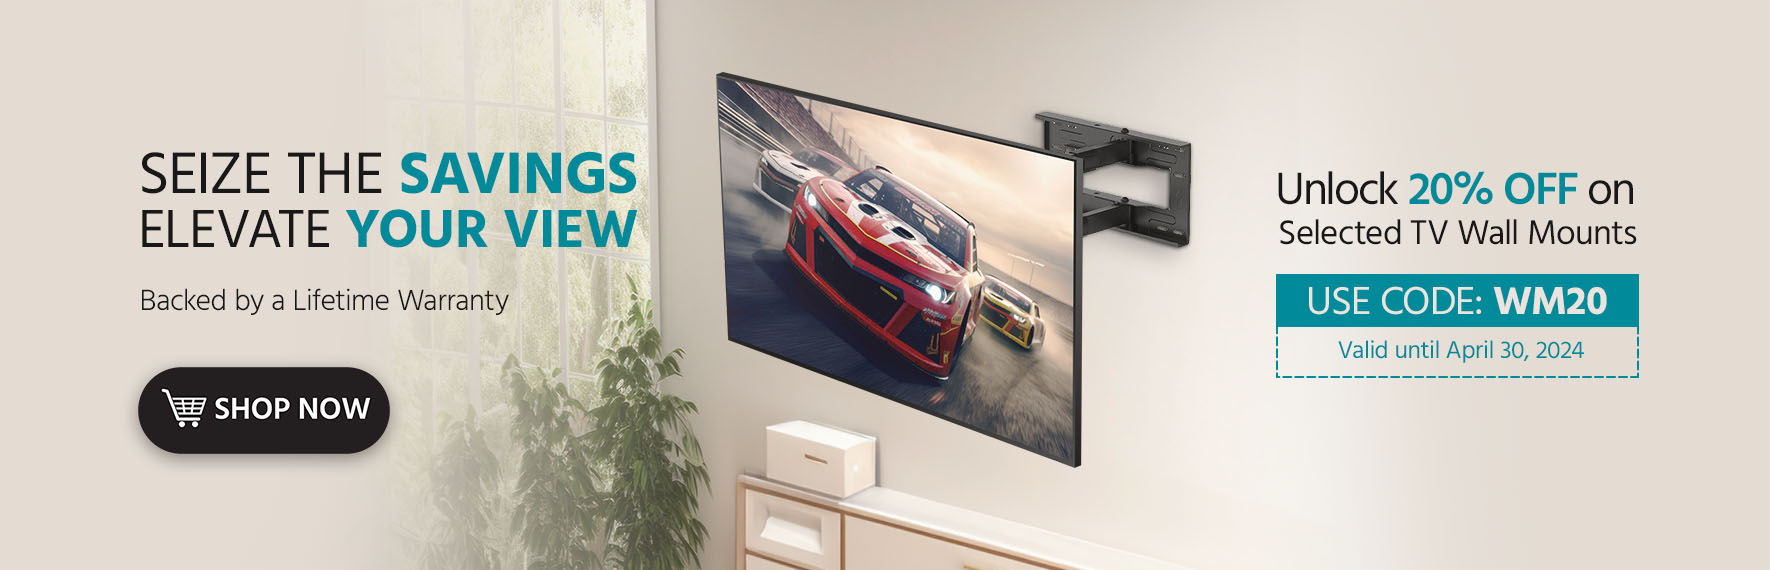 COPY Seize the Savings, Elevate Your View Unlock 20% Off on Select Full Motion Wall Mounts Backed by a Lifetime Warranty  With Code: WM20 Shop Now